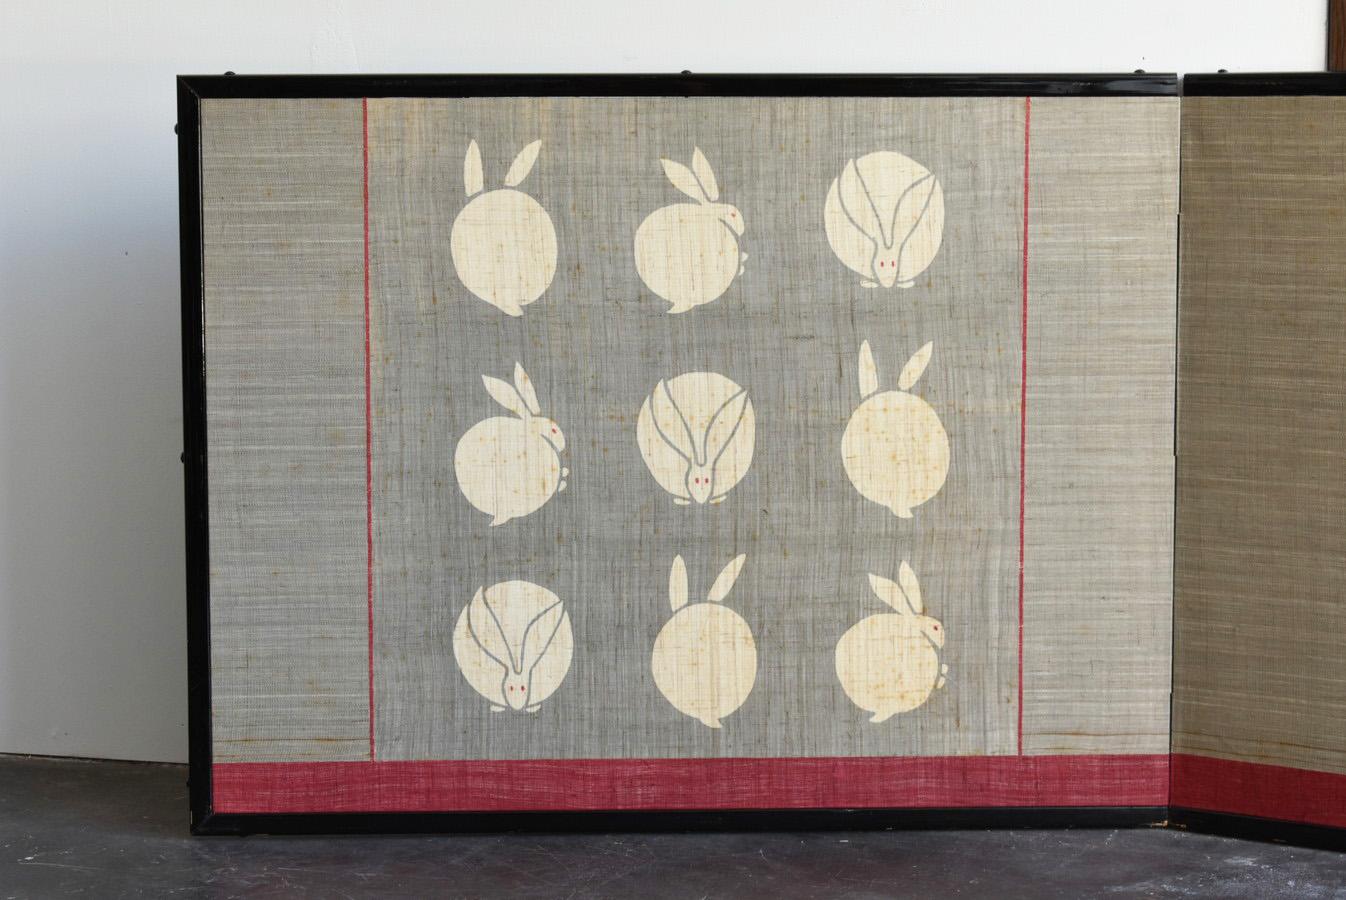 Dyed Japanese Folding Screen with Moon and Rabbit Drawn on Cloth/Old Partition/20th